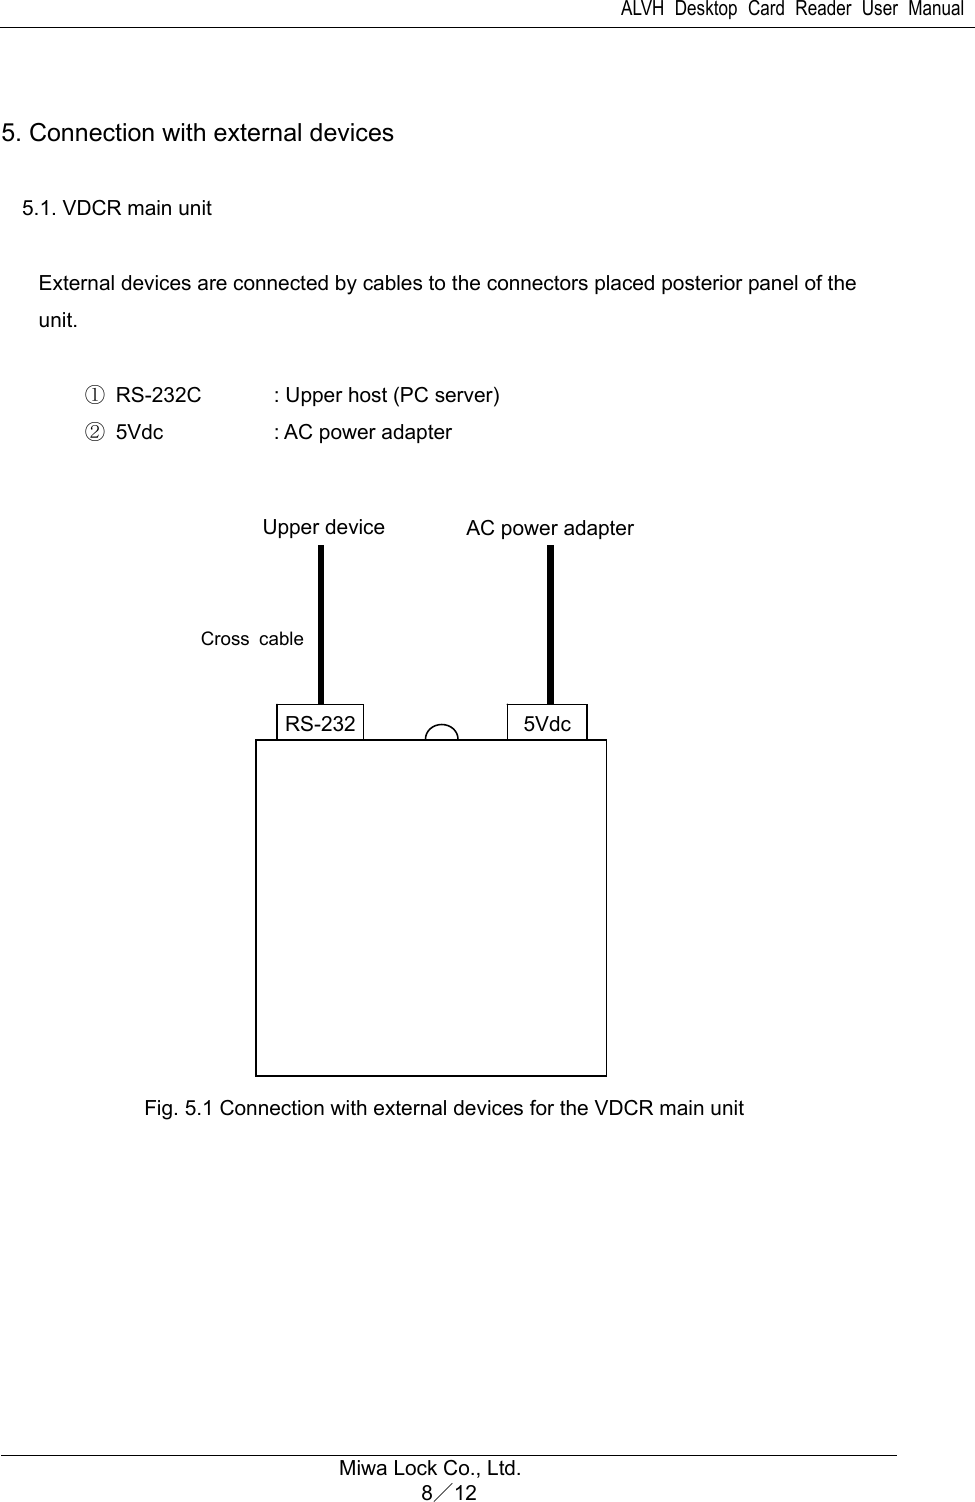 ALVH Desktop Card Reader User Manual  Miwa Lock Co., Ltd. 8／12   5. Connection with external devices   5.1. VDCR main unit  External devices are connected by cables to the connectors placed posterior panel of the unit.       ① RS-232C  : Upper host (PC server)     ② 5Vdc       : AC power adapter                   Fig. 5.1 Connection with external devices for the VDCR main unit  5VdcRS-232Upper device  AC power adapter Cross cable 